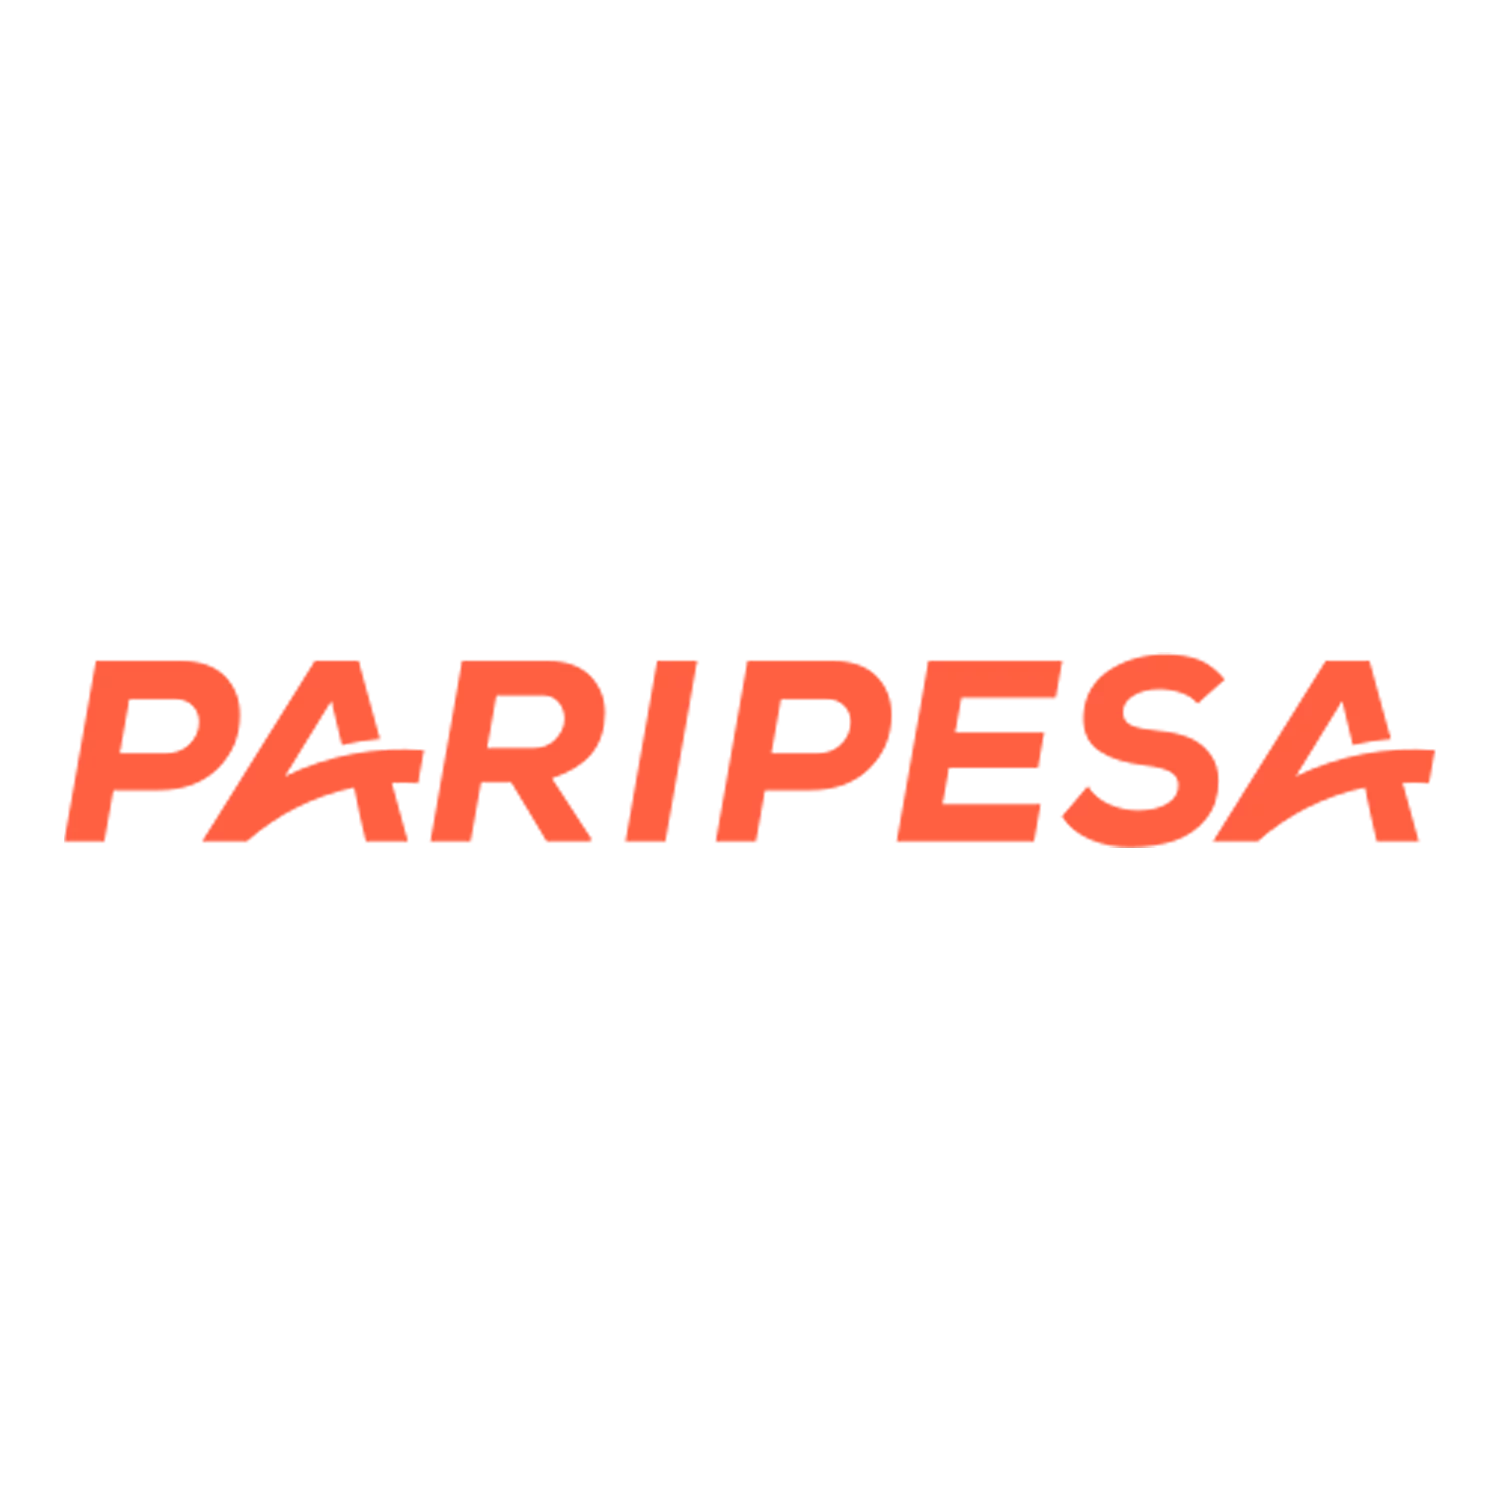 In this article, you find information on how to bet on sports and play casino games at Paripesa.